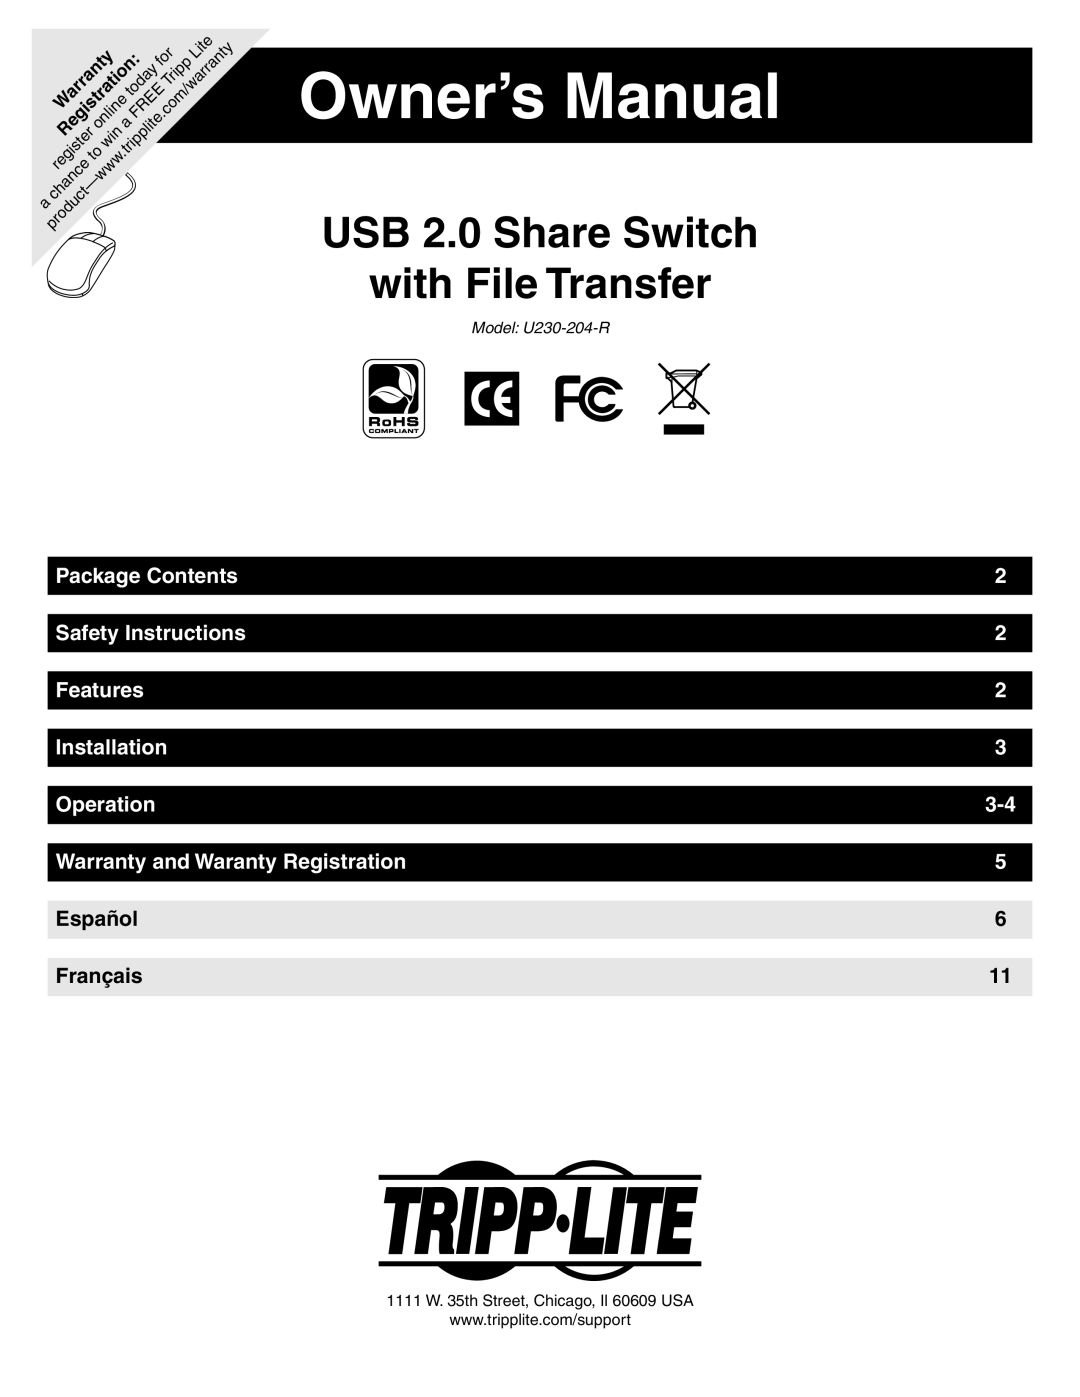 Tripp Lite U230-204-R warranty Quick Start Guide, USB 2.0 Share Switch with File Transfer, Package Contents 